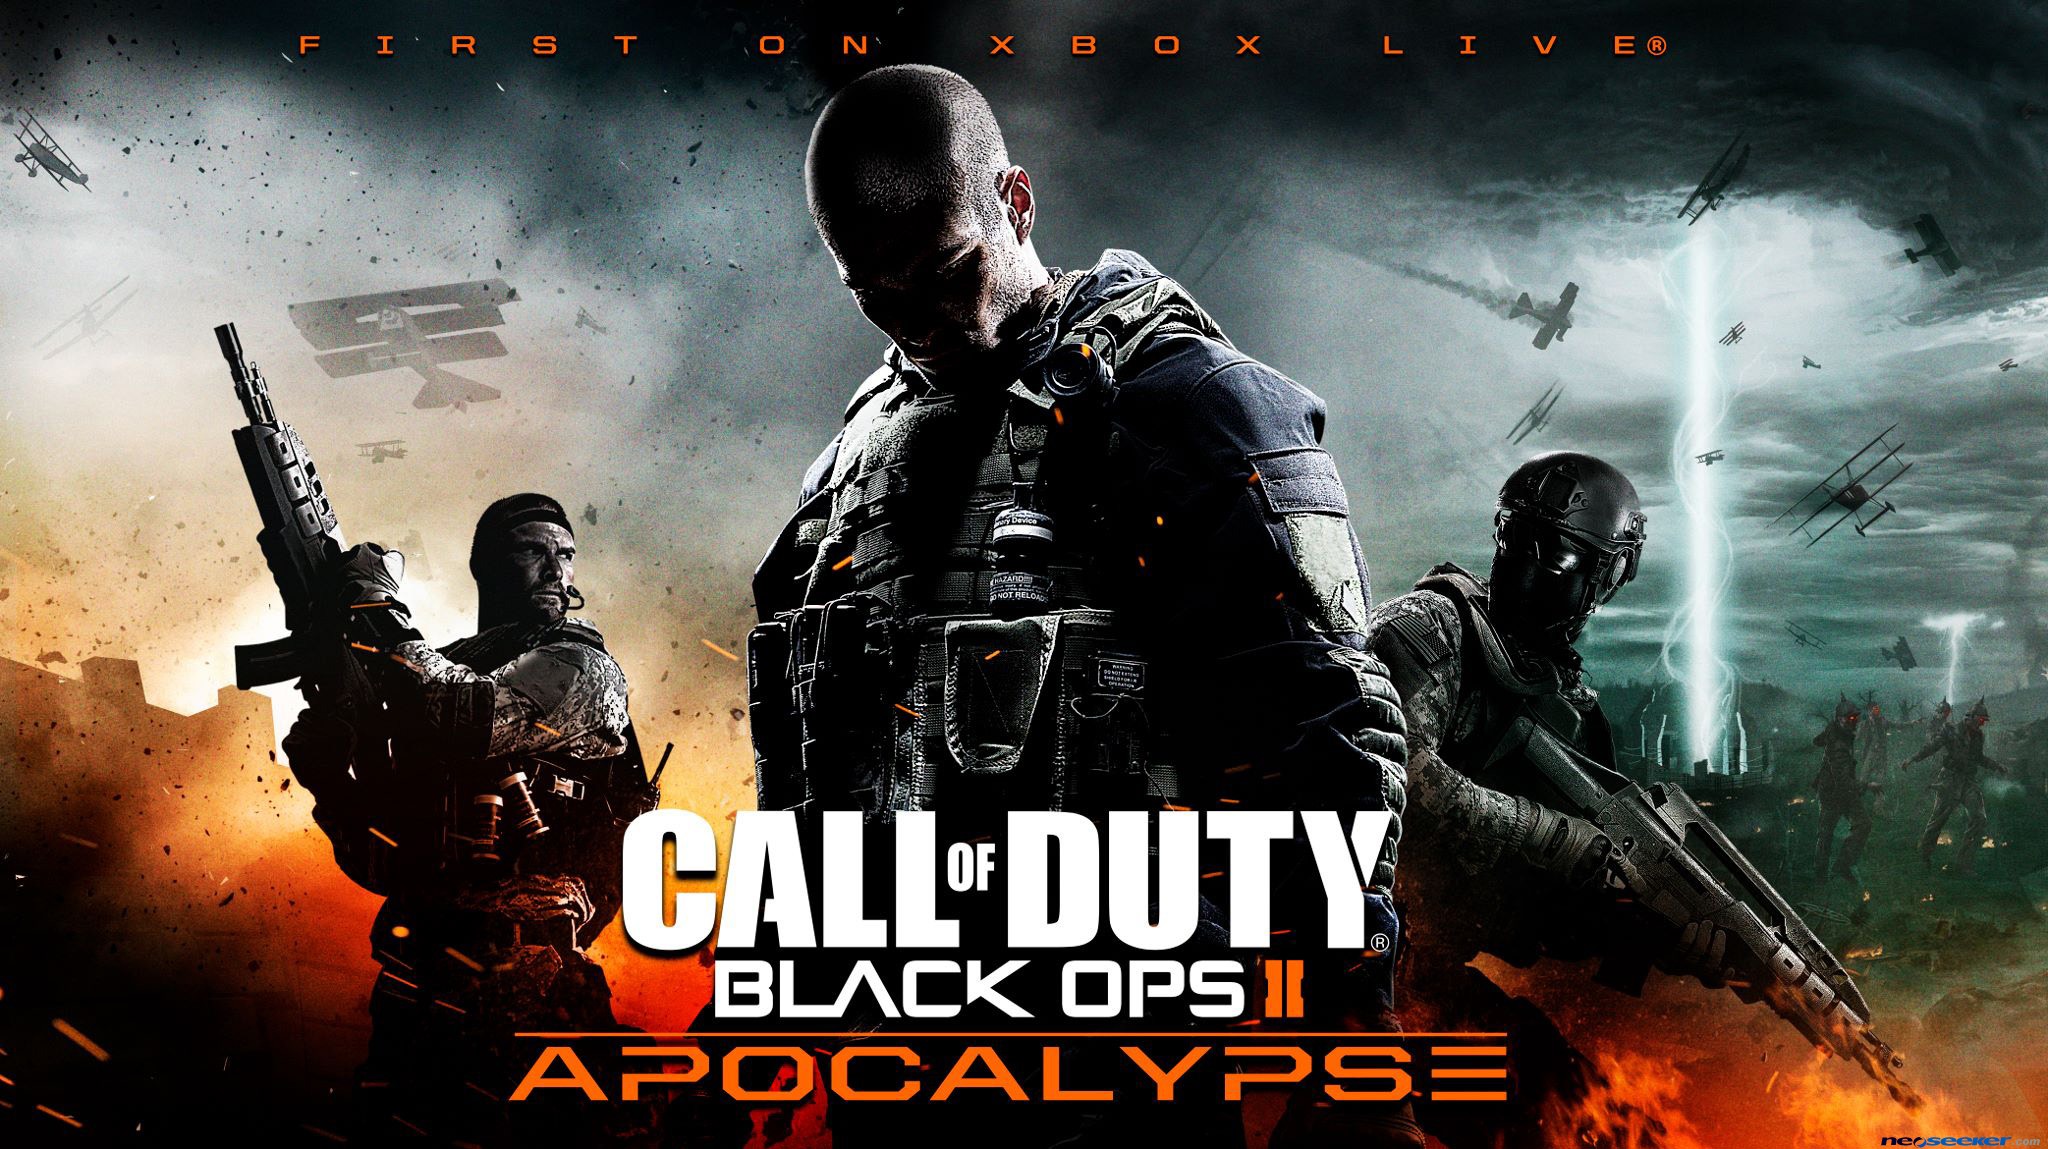 Call of Duty Black Ops 2 DLC wraps up with Apocalypse brings new